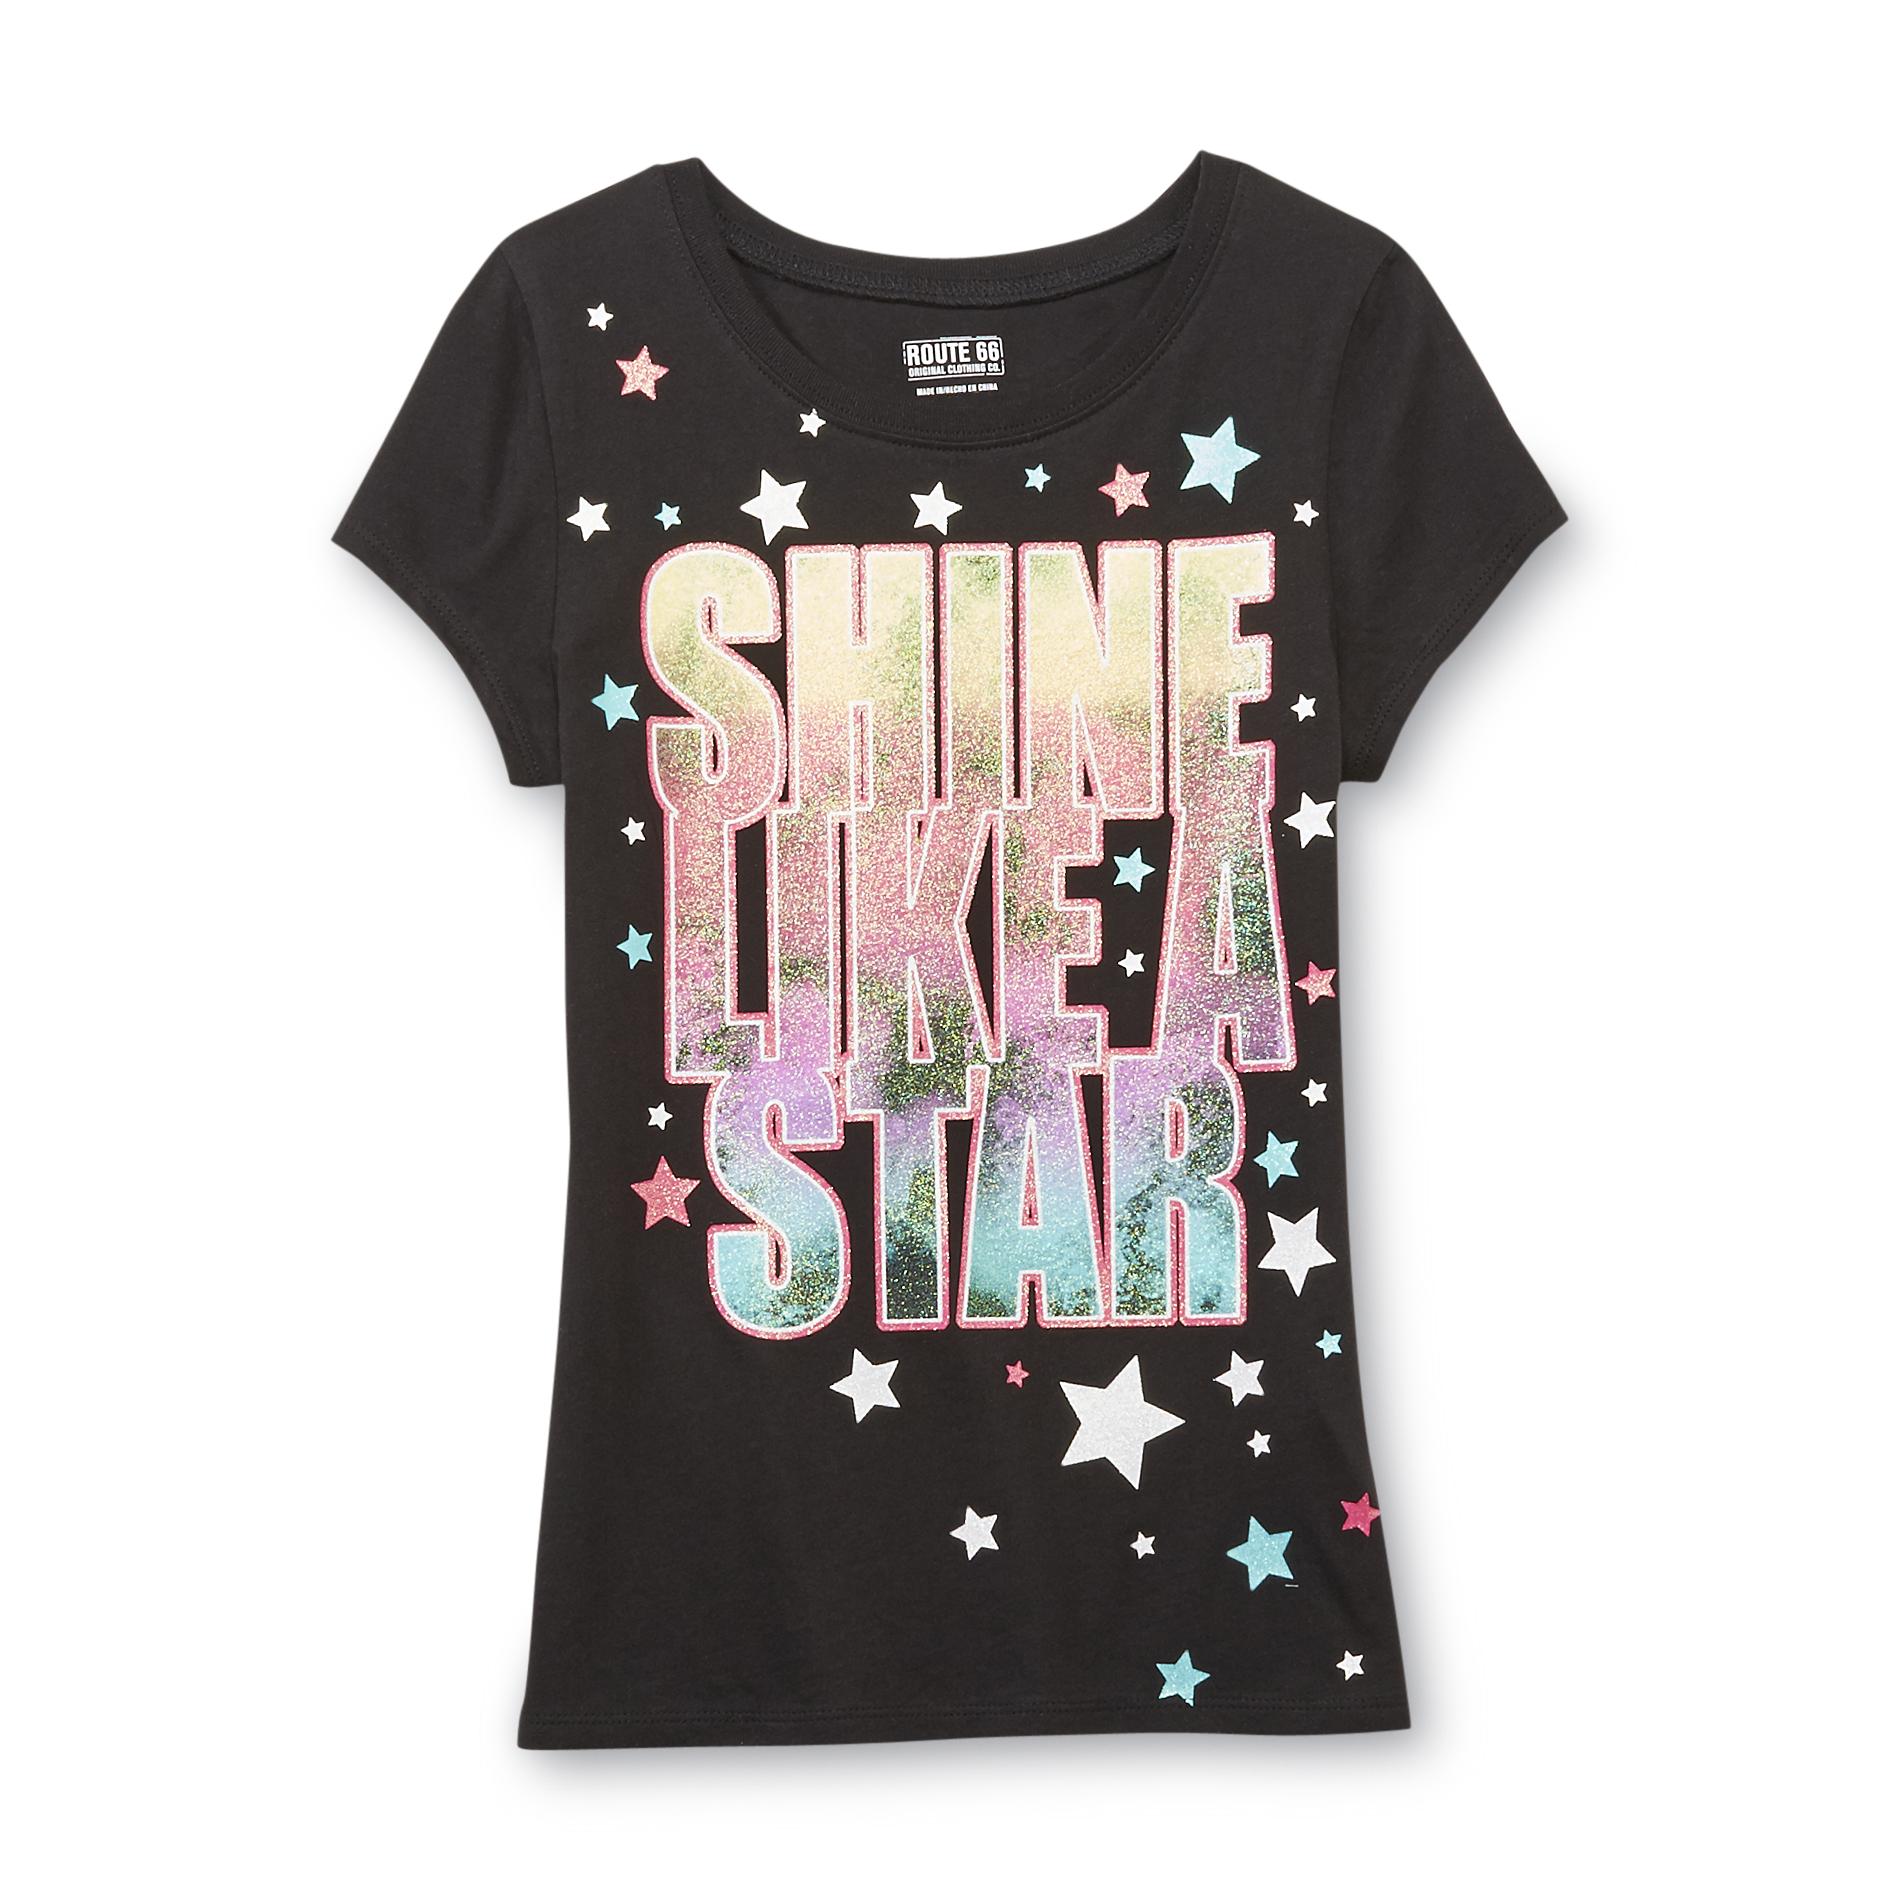 Route 66 Girl's Graphic T-Shirt - Shine Like A Star